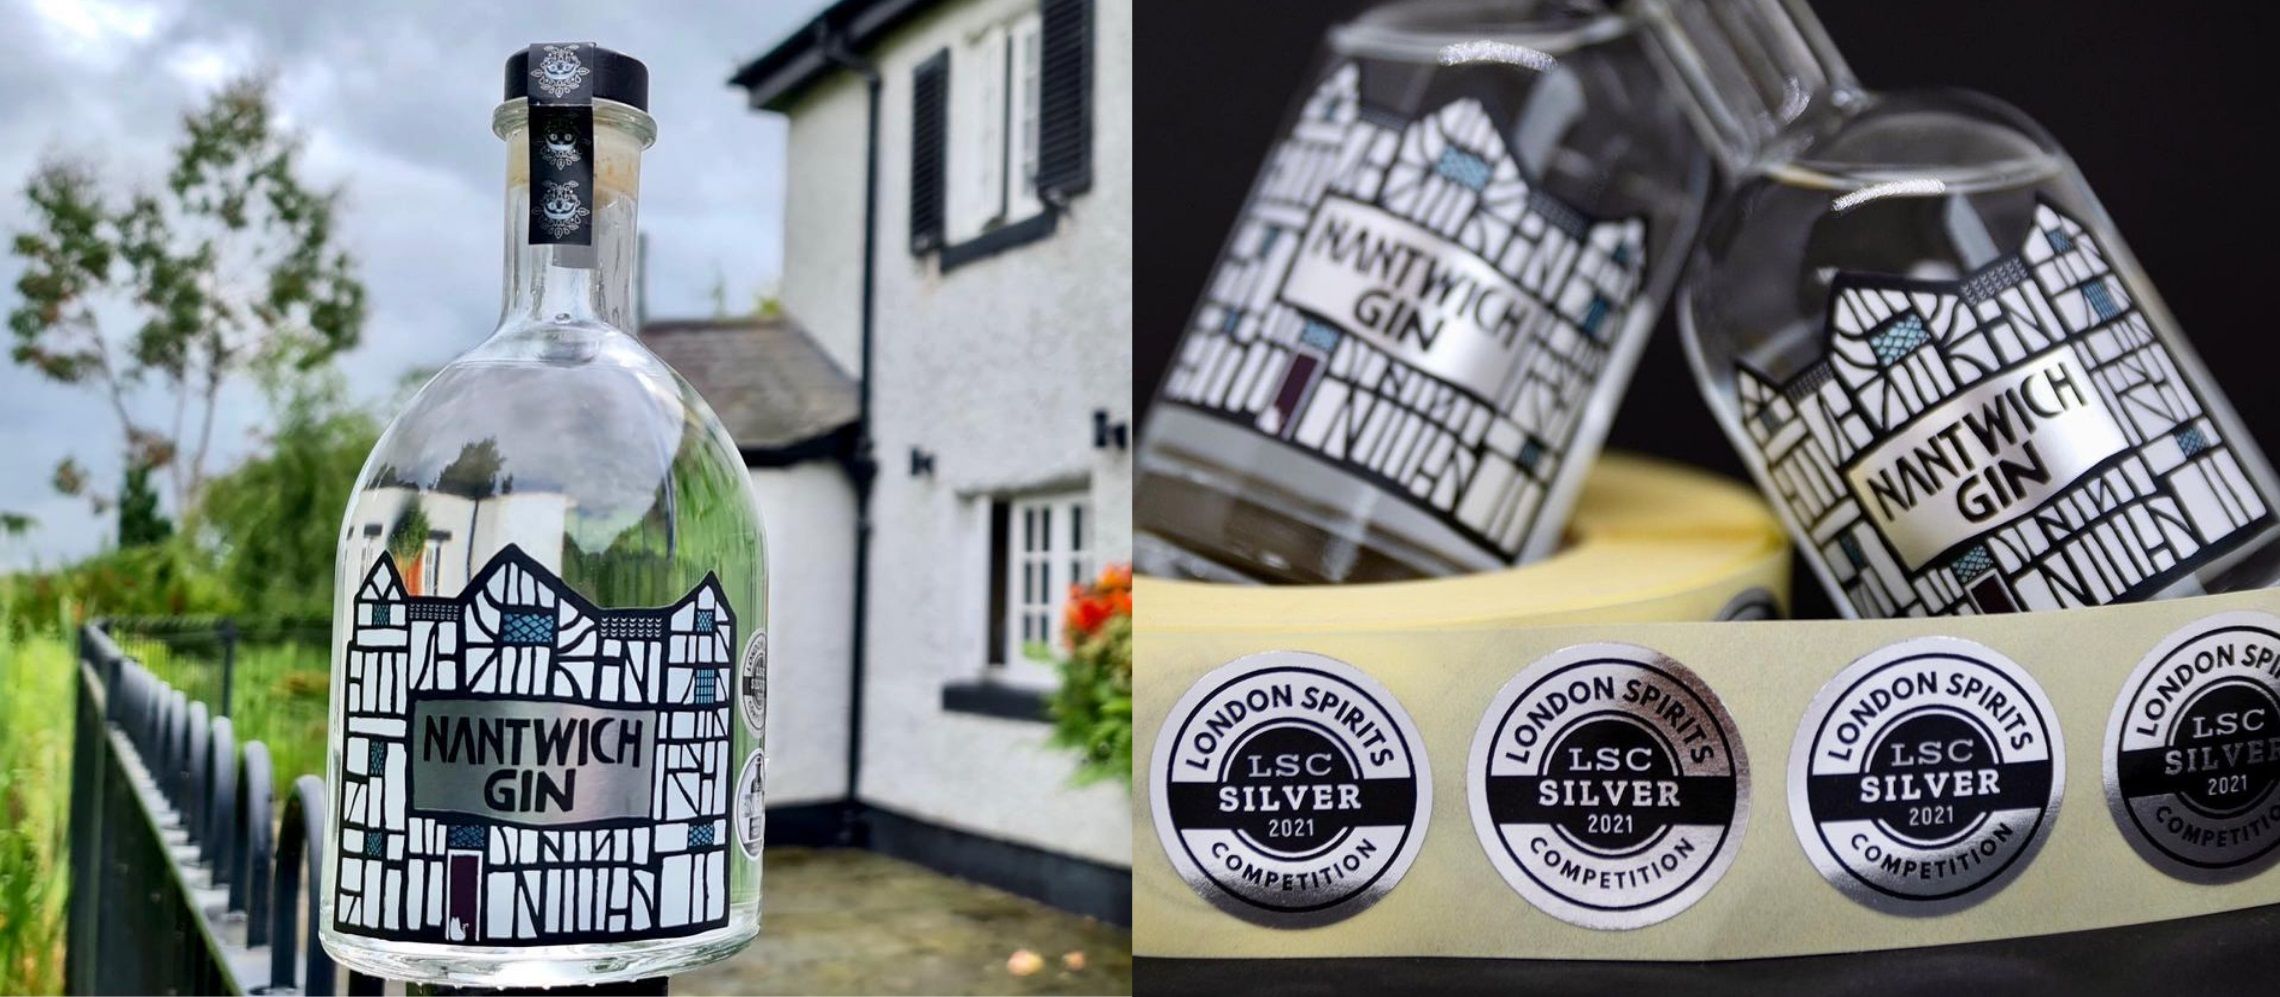 Photo for: Cheshire Botanicals Adds New Medal From The Global Spirits Masters To Growing List Of Awards For Nantwich Gin